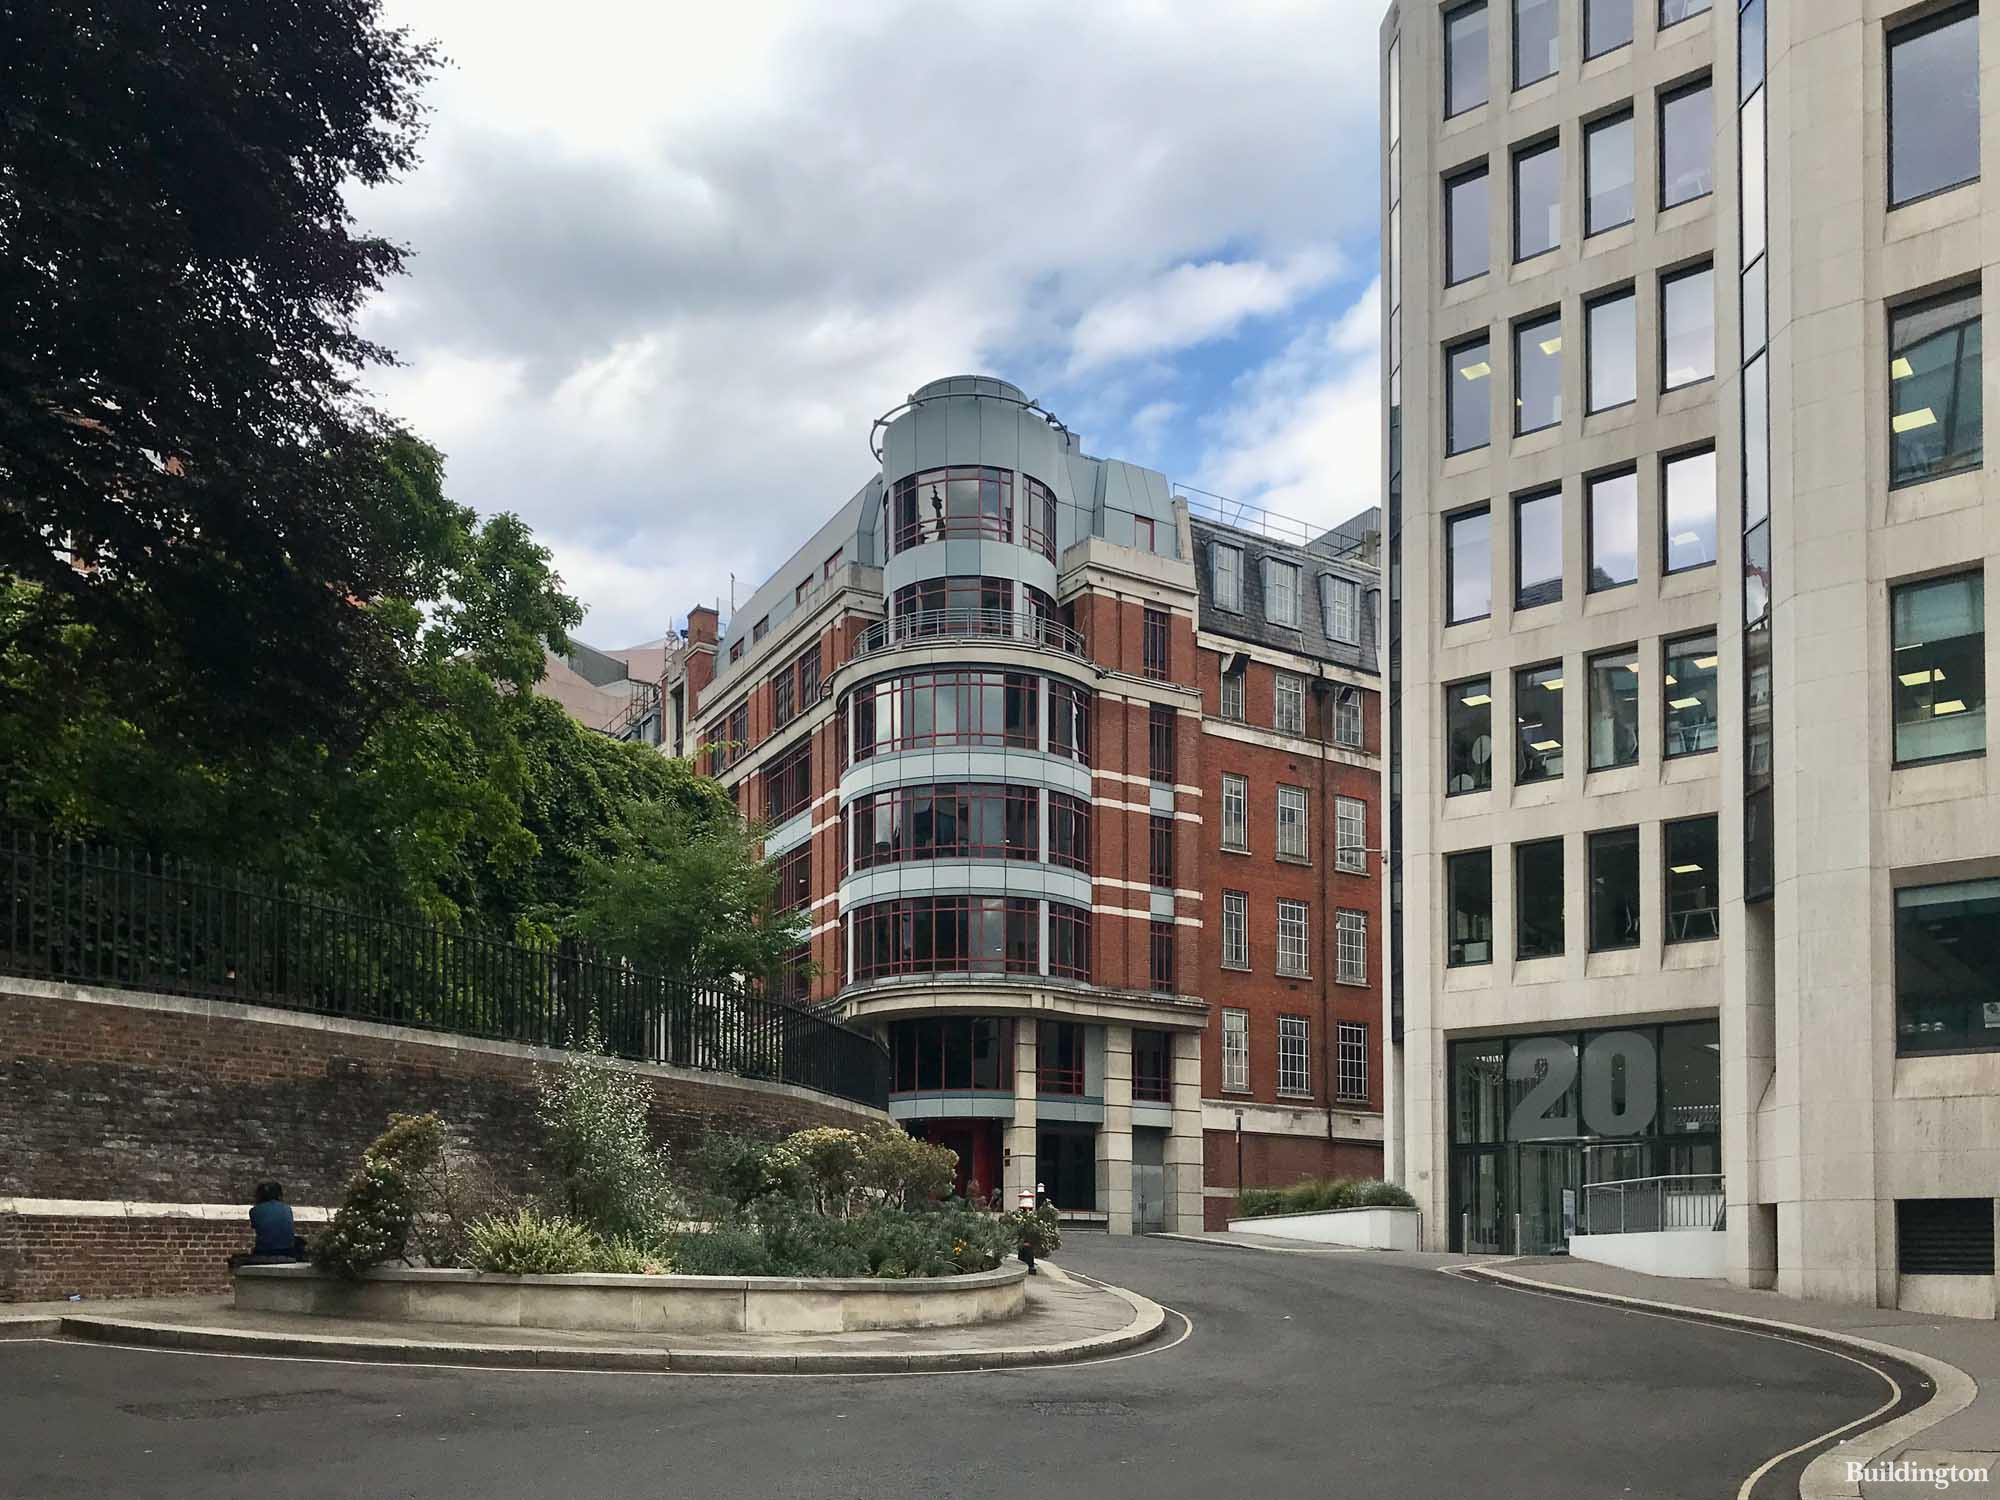 Pinnacle House on St Dunstan's Hill in the City of London EC3. 20 St Dunstan's Hill to the right.